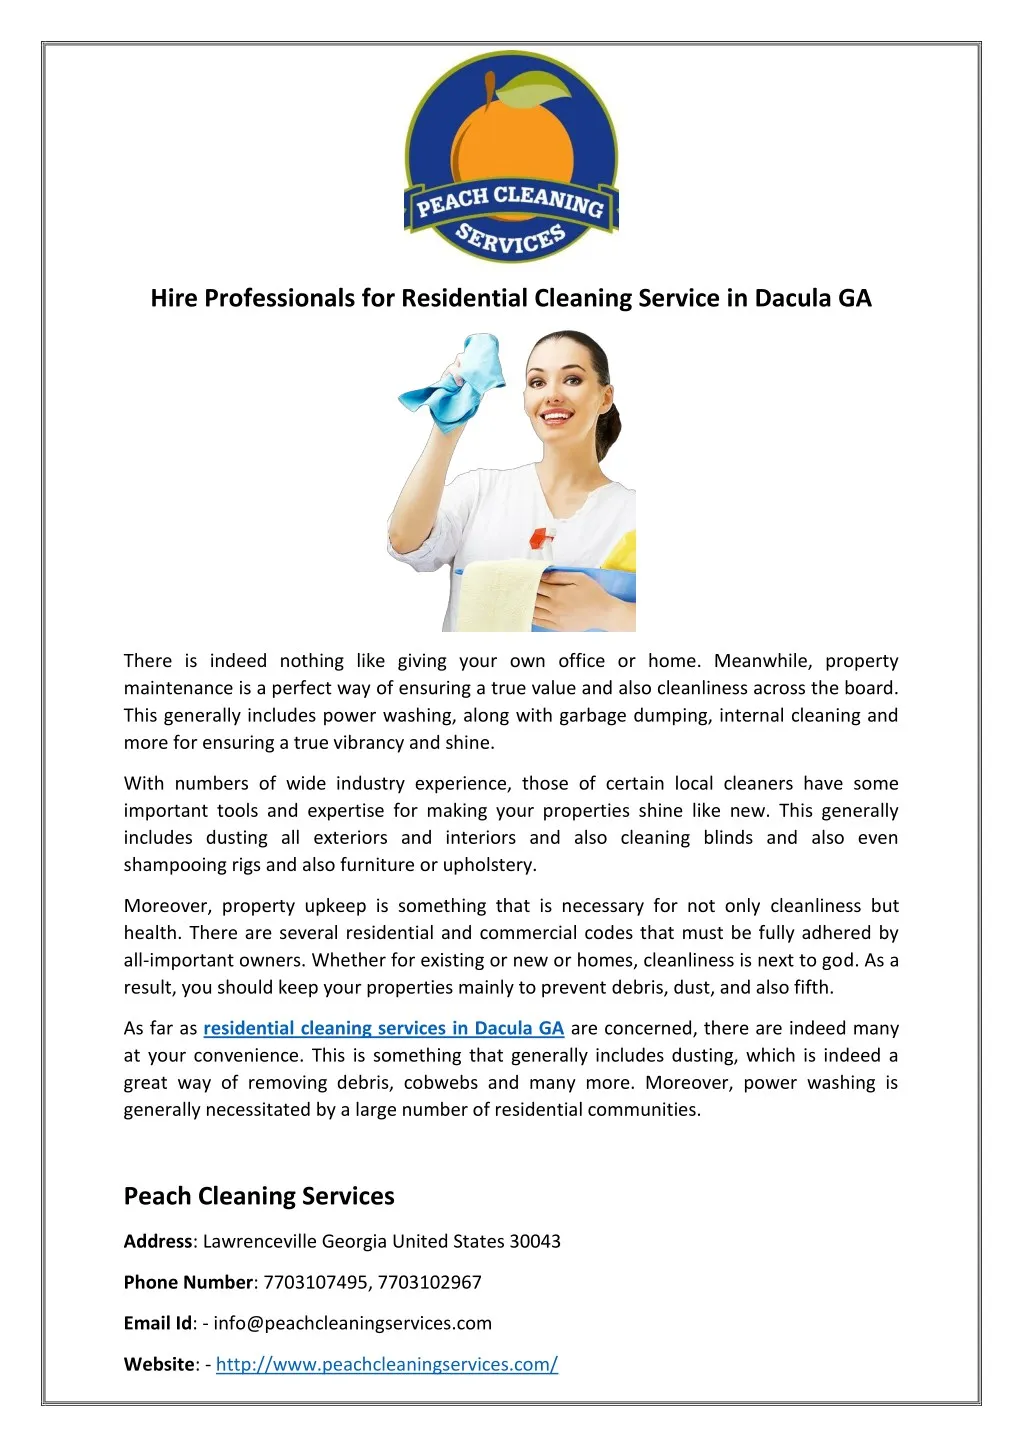 hire professionals for residential cleaning